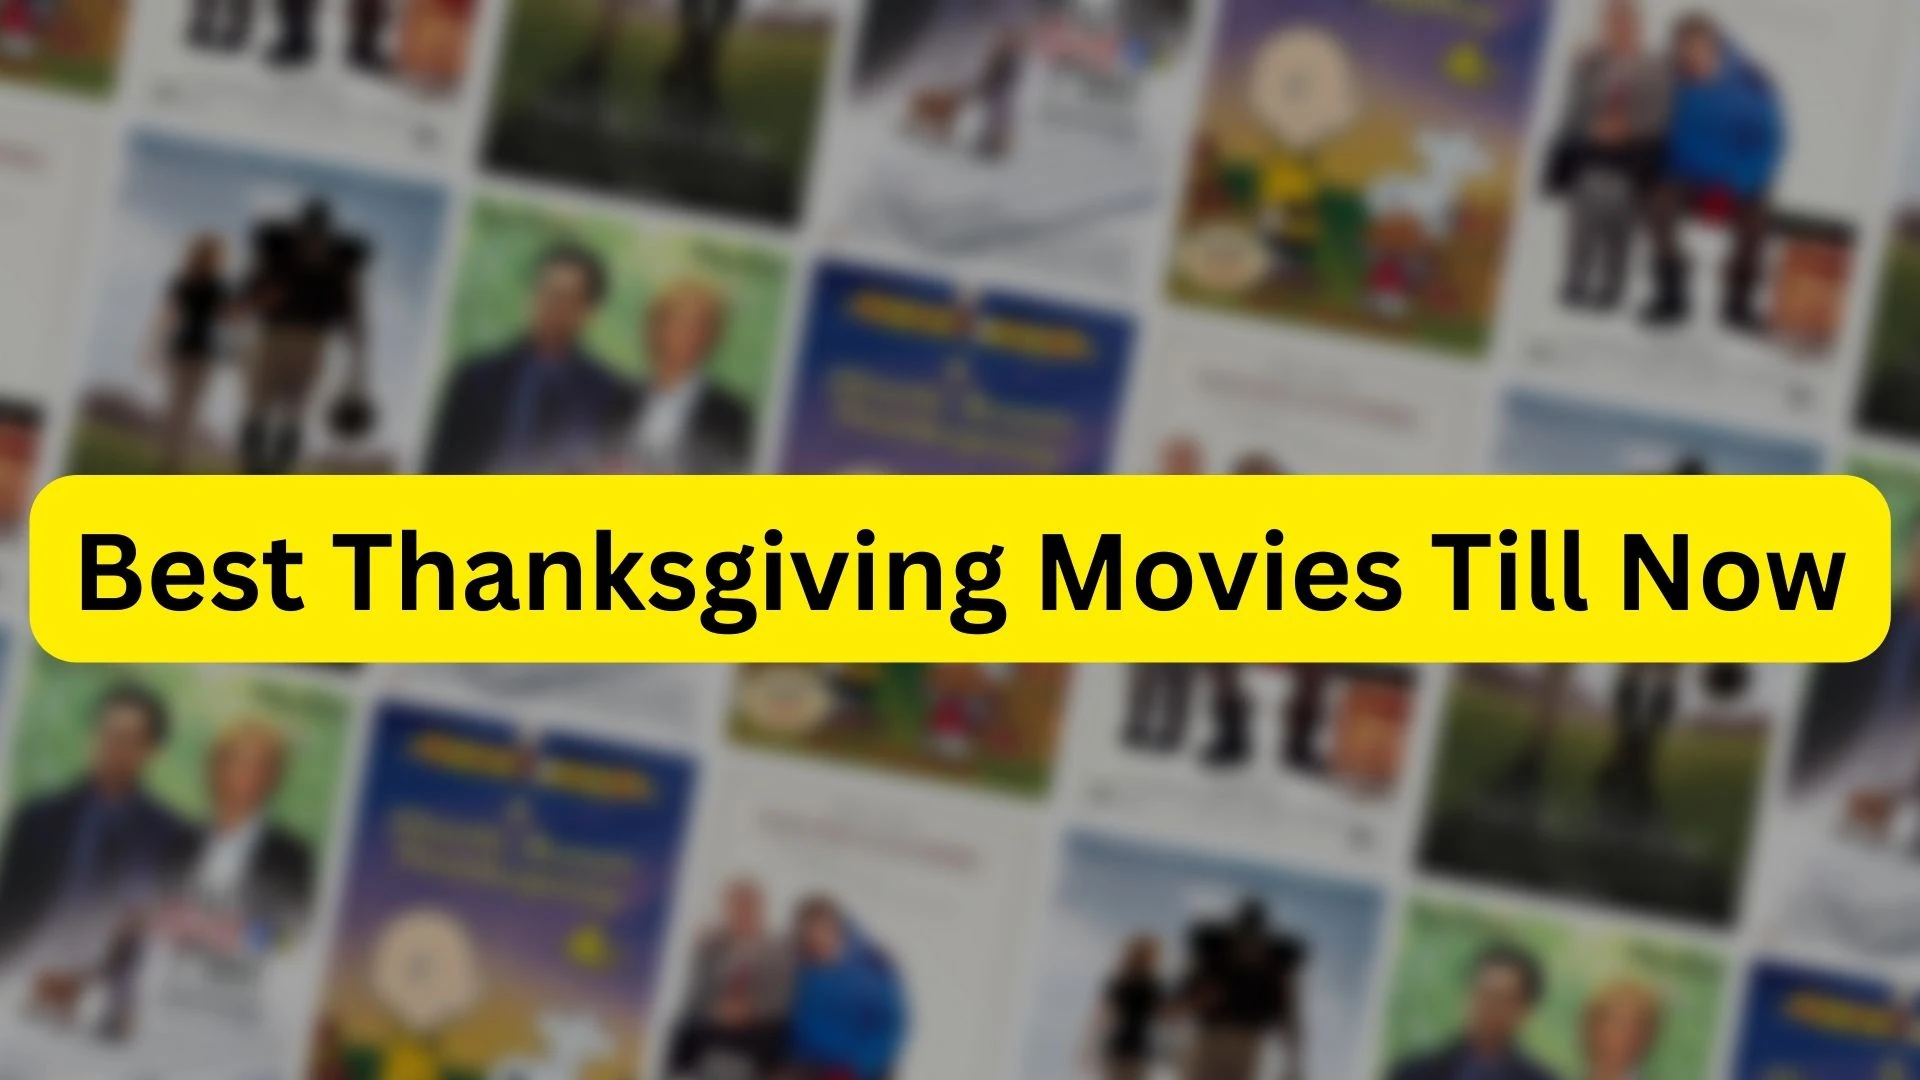 Best Thanksgiving Movies Till Now. Thanksgiving R rated movies, g rated, pg rated, pg-13 rated, family, kids, animated movies.